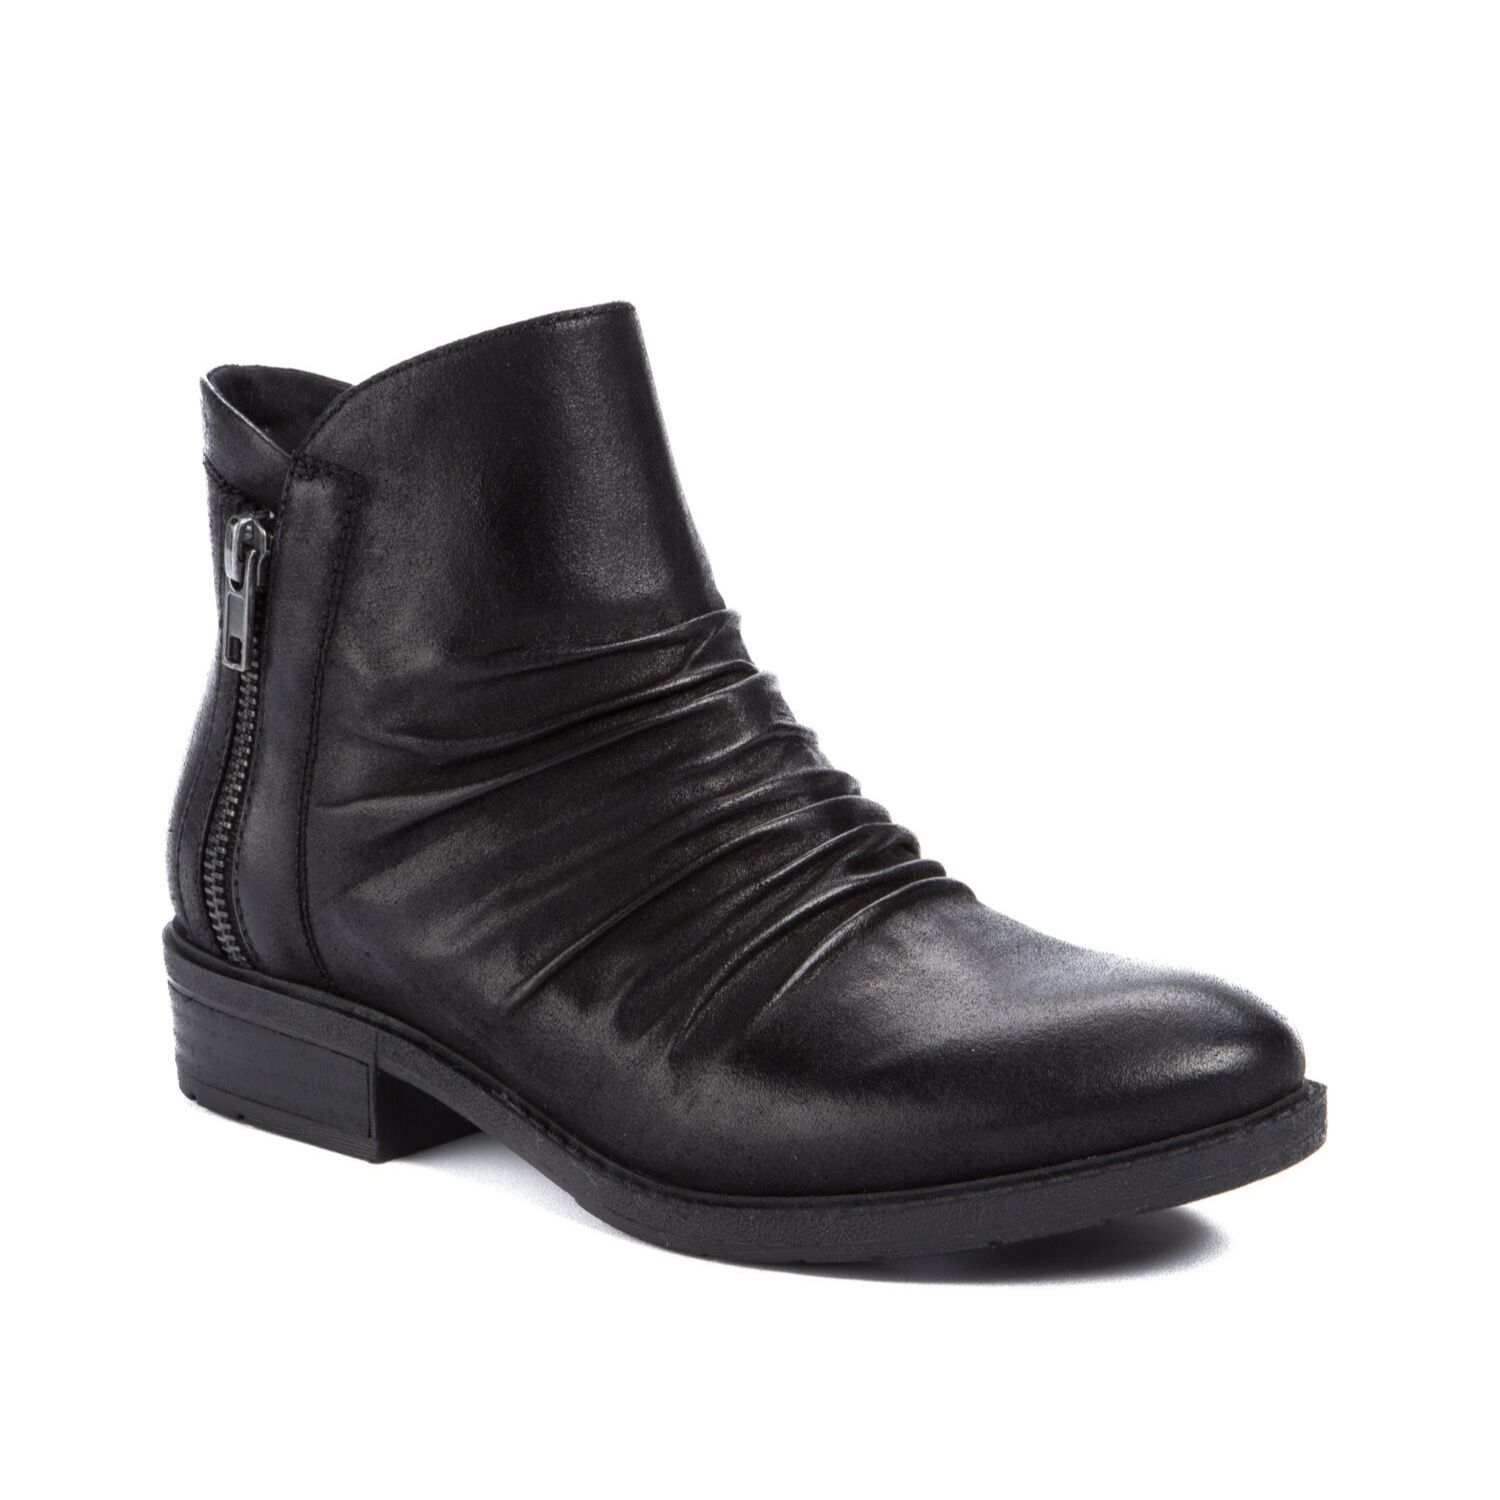 BARETRAPS Black Oiled Faux Leather Ruched Zipper Detail Yuno Ankle Booties